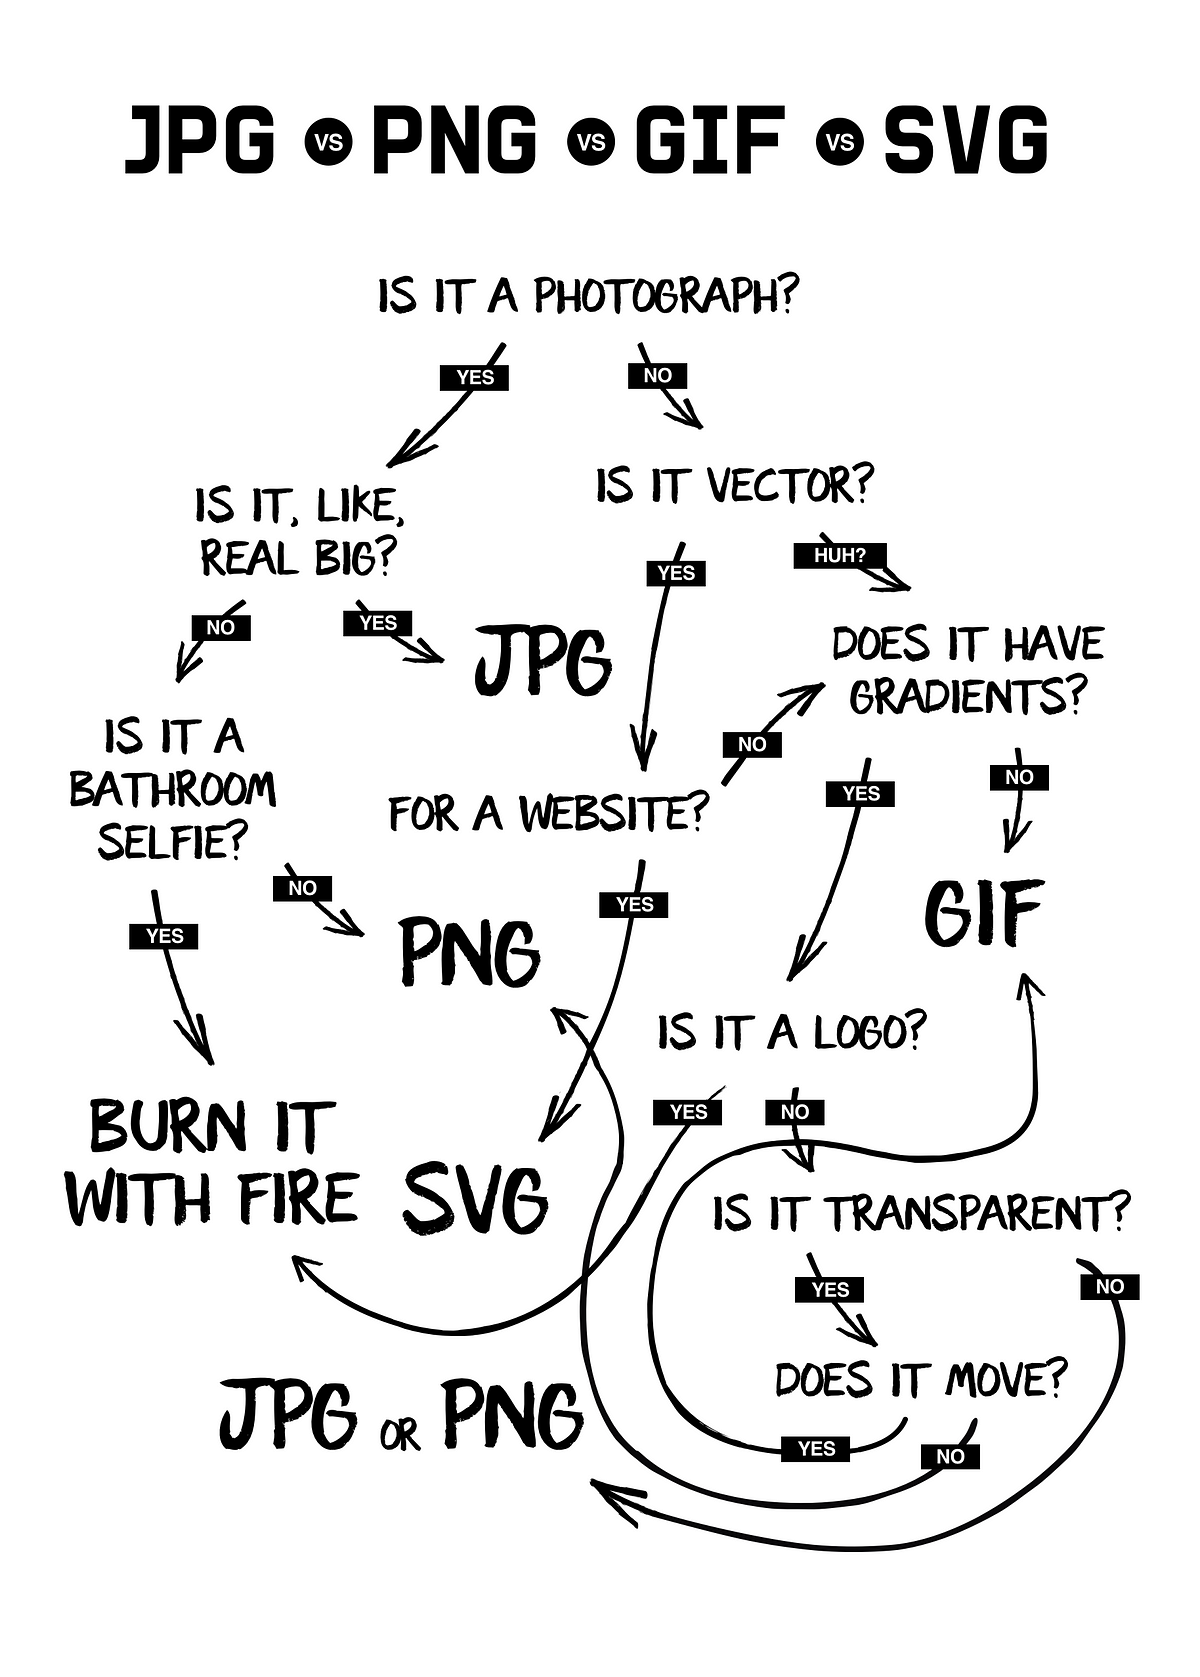 jpg-vs-png-vs-gif-vs-svg-when-to-use-which-by-allen-ux-collective